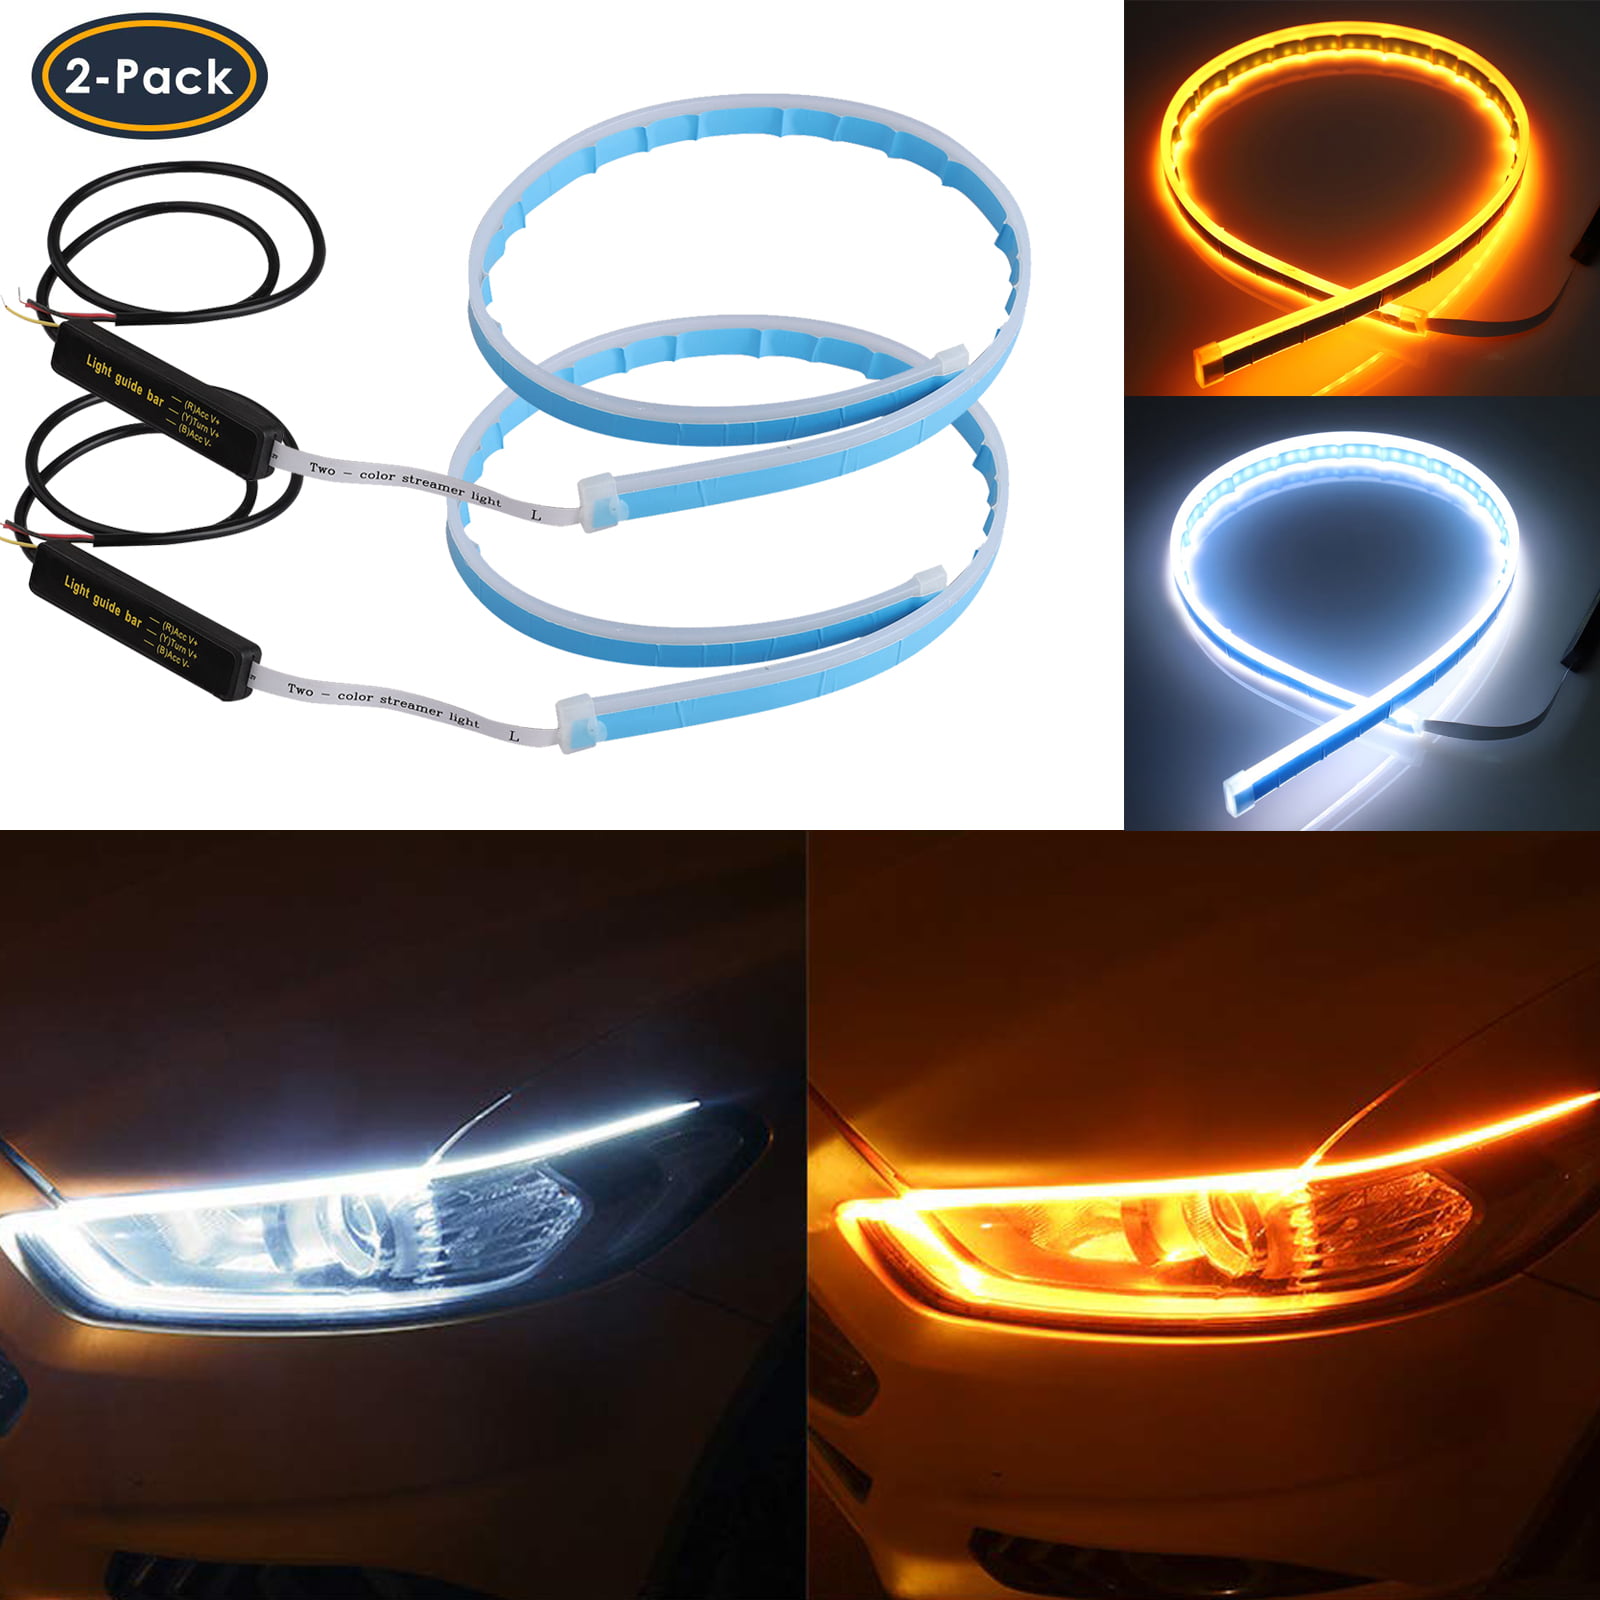 LECART 2Pcs Car Led Headlight Surface Strip Tube Light Dual Color White and Amber Yellow Headlight LED Strip Light Auto Turn Signal Lights Day Time Running Light Switchback Headlight Decorative Strips 